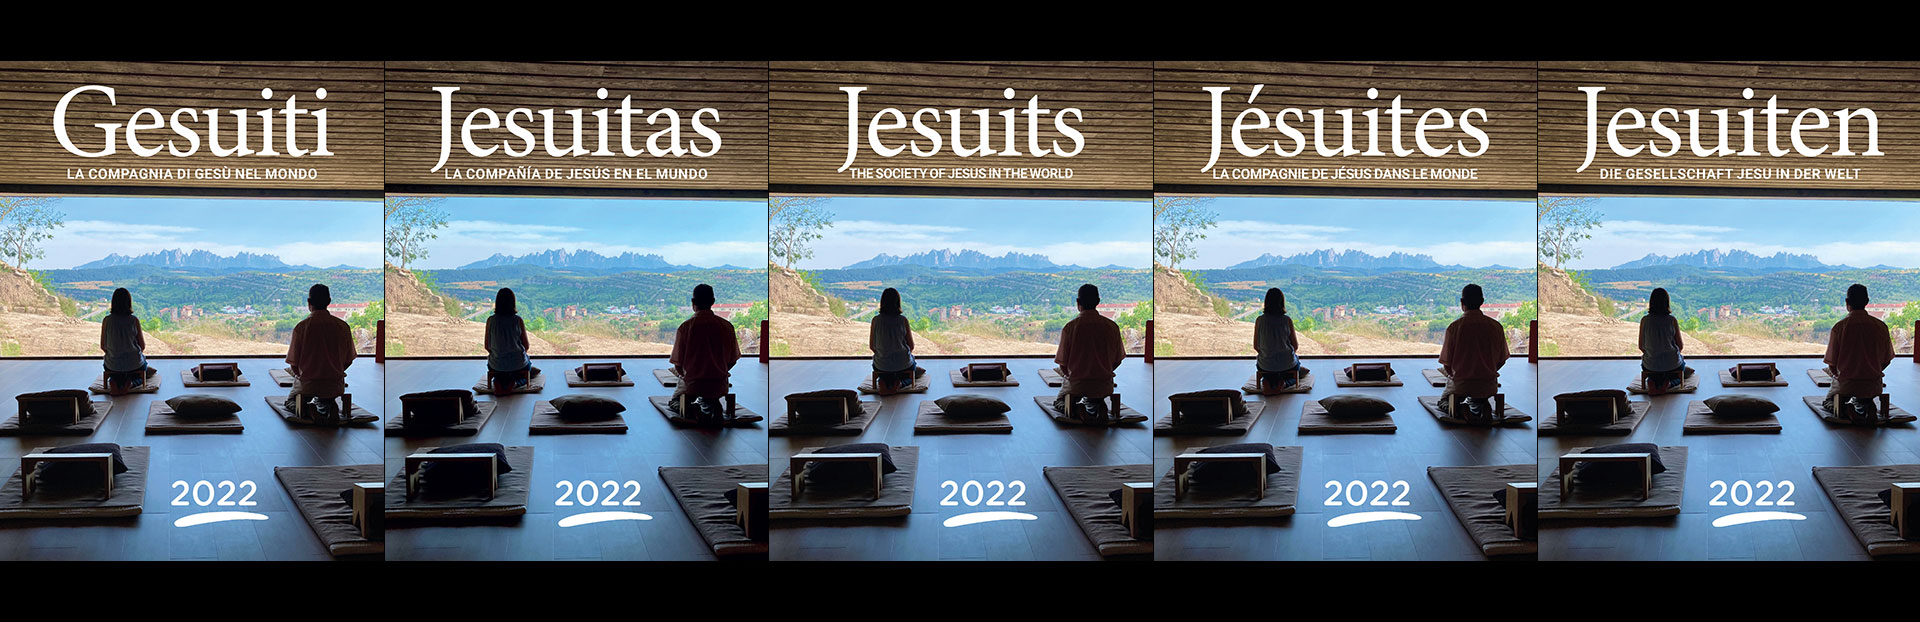 Jesuits 2022 – Now available online